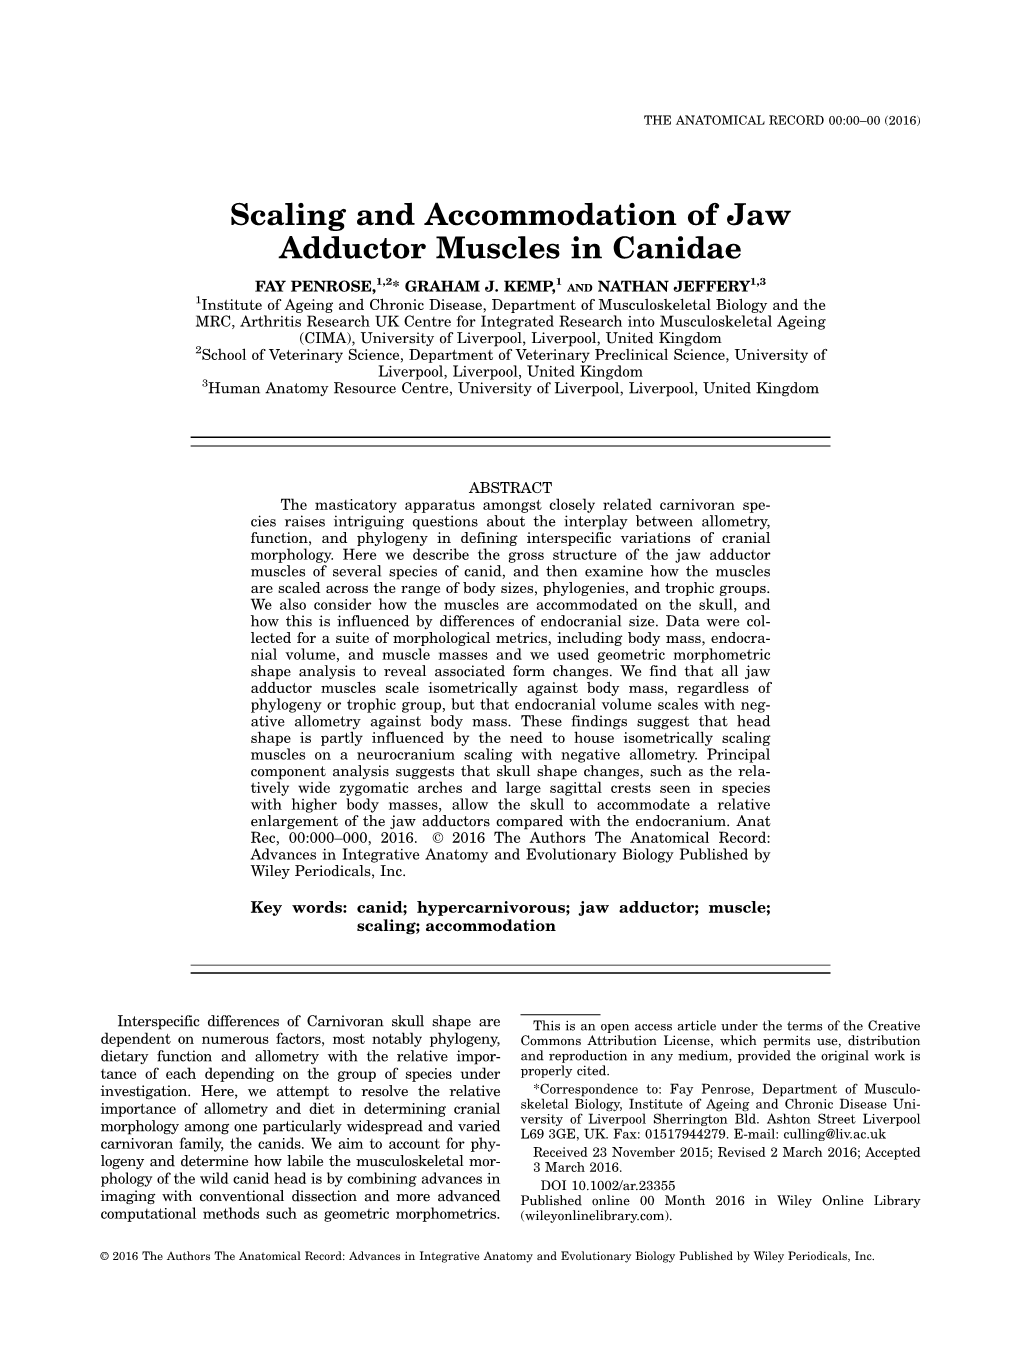 Scaling and Accommodation of Jaw Adductor Muscles in Canidae